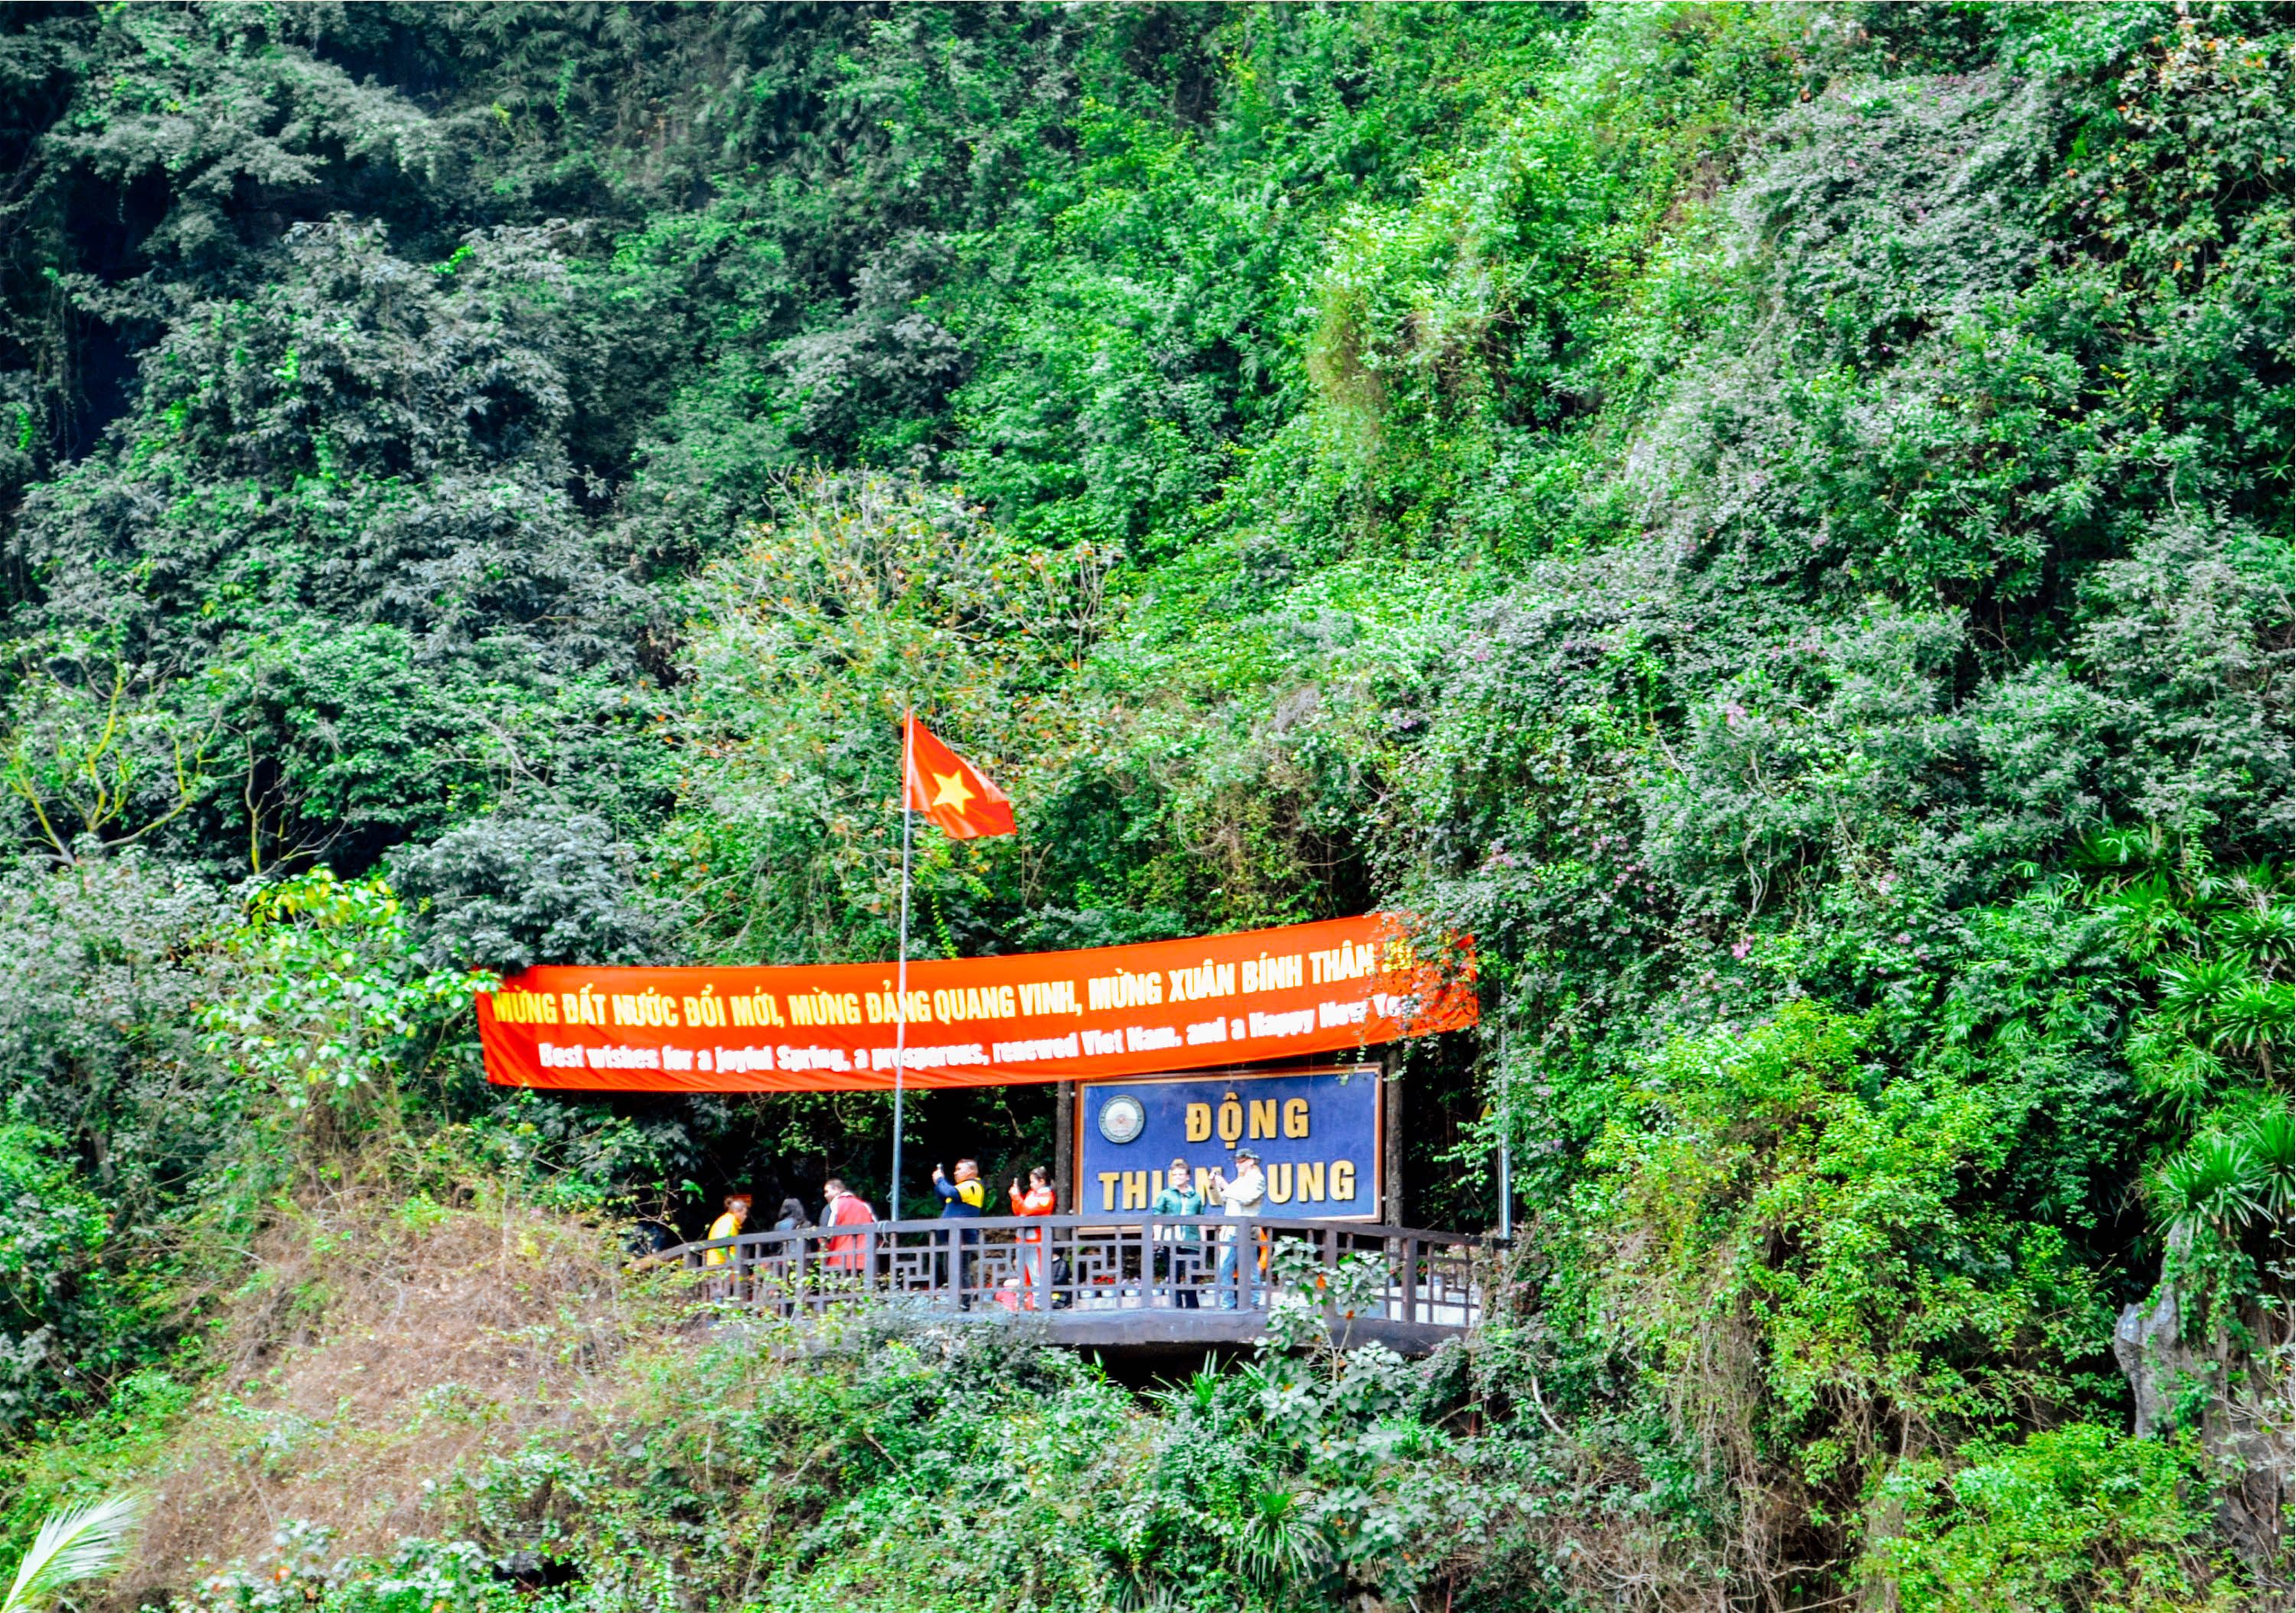 Entrance to Dong Thien Cung cave 